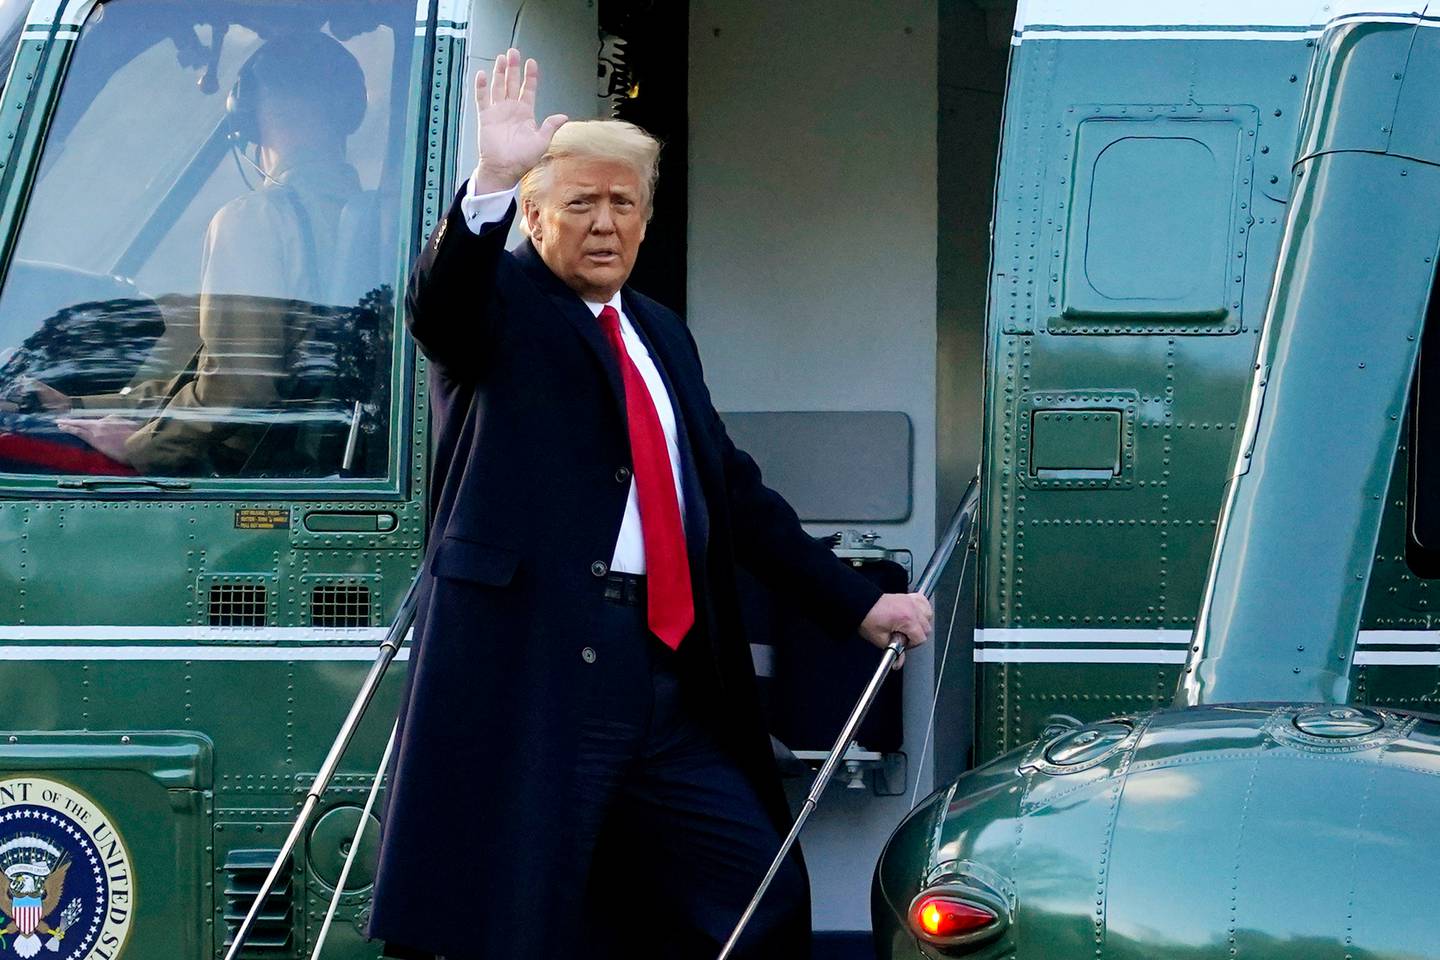 Donald Trump waves as he boards Marine One on the South Lawn of the White House. Photo / AP